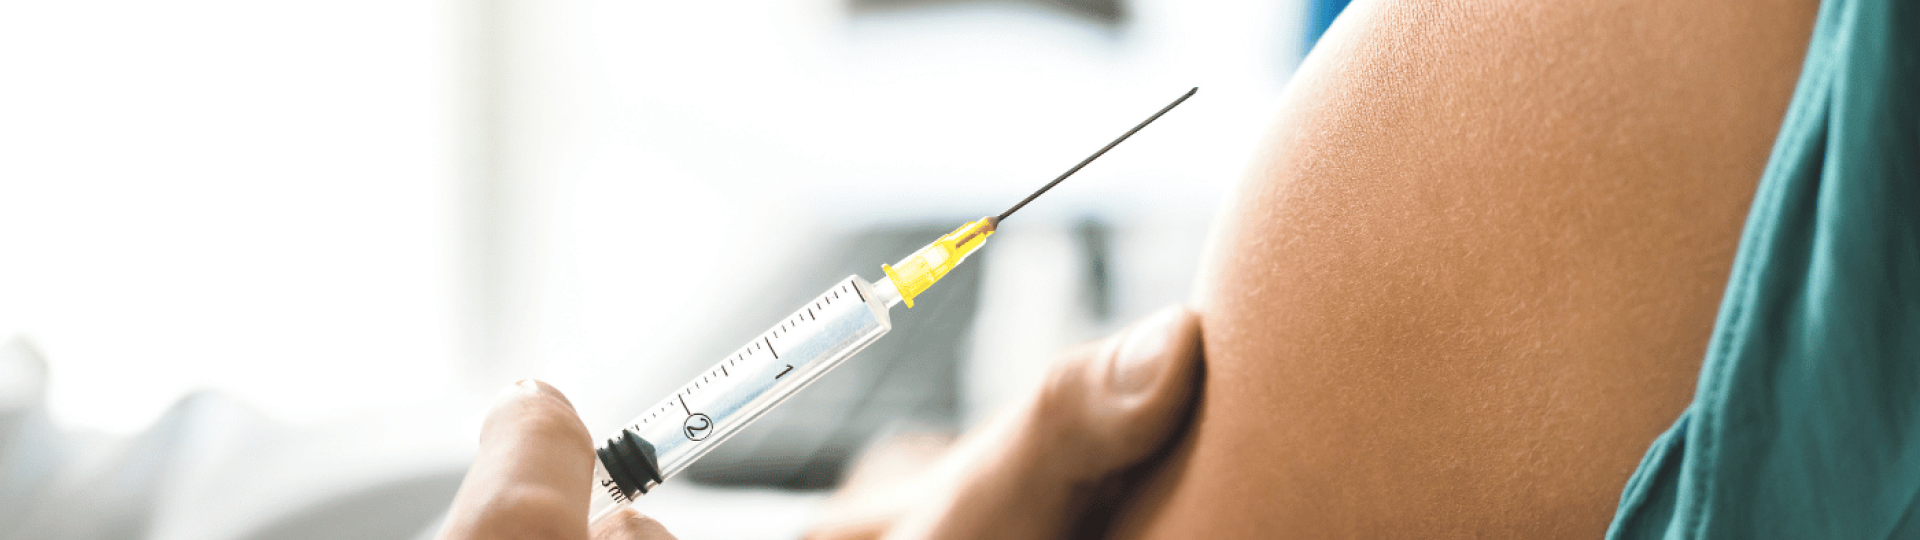 person being injected - syringe